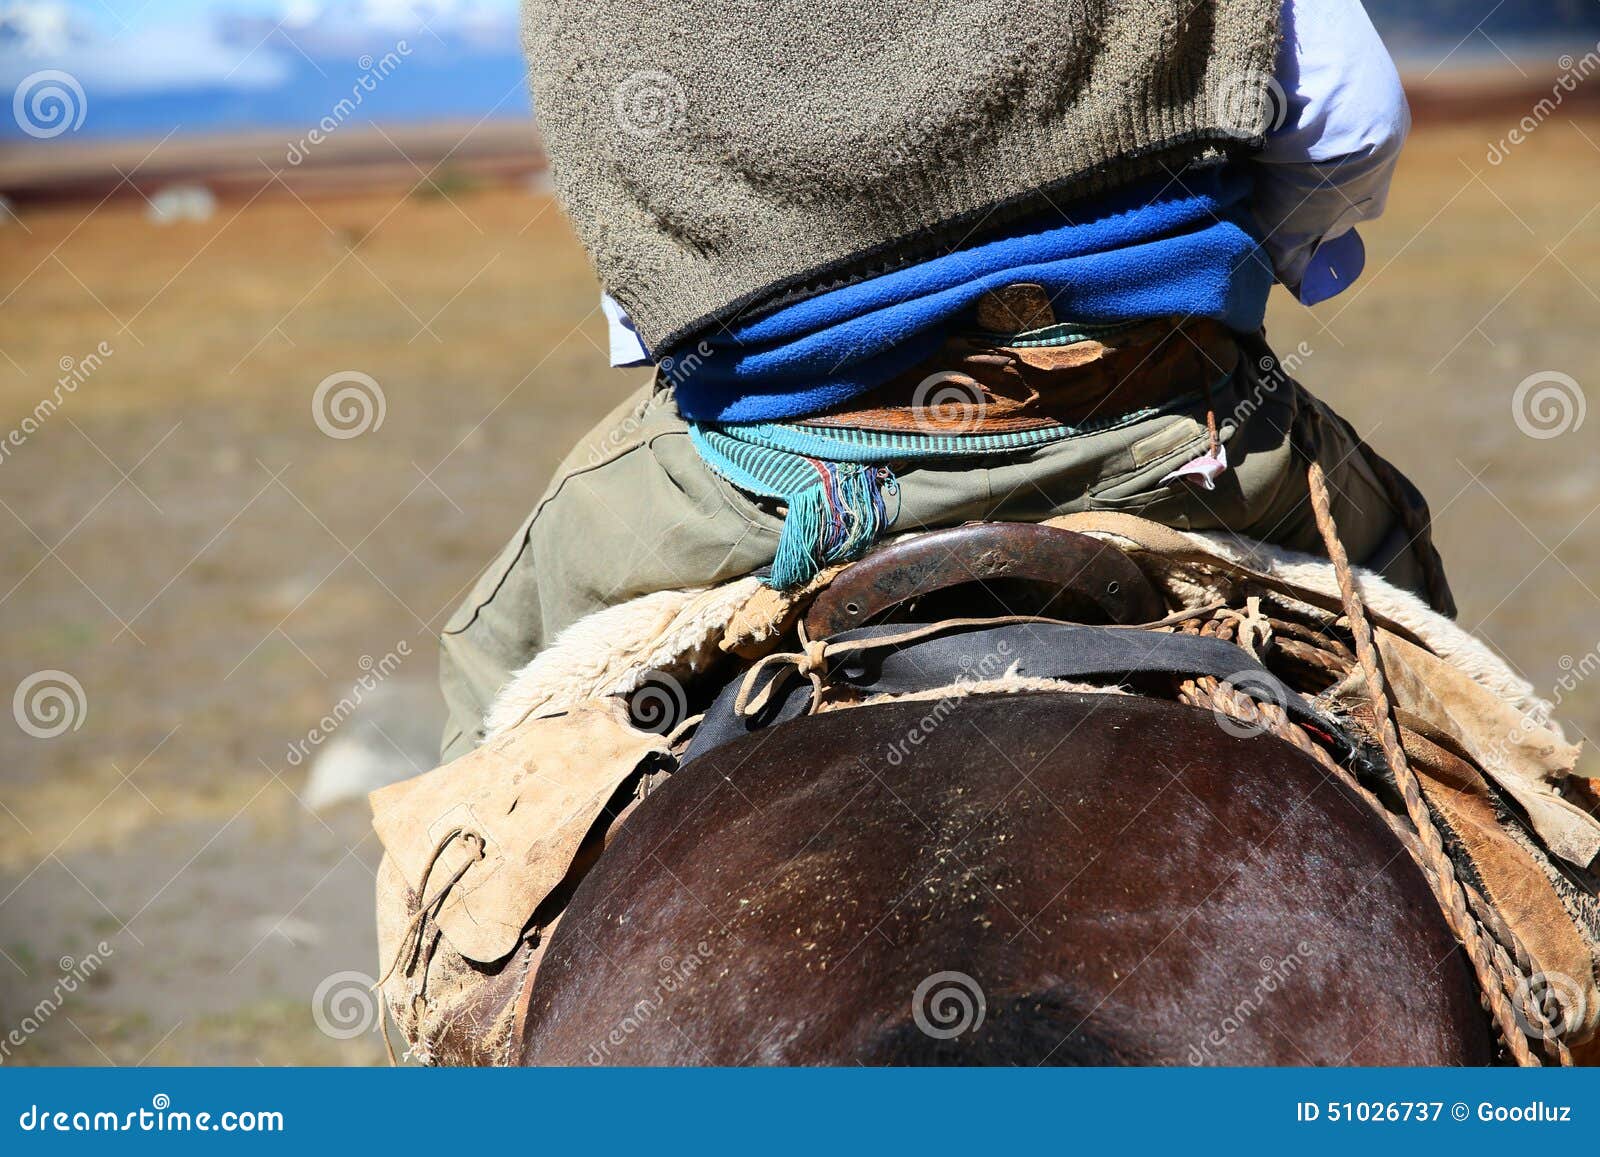 back view of gaucho riding horse in argentina